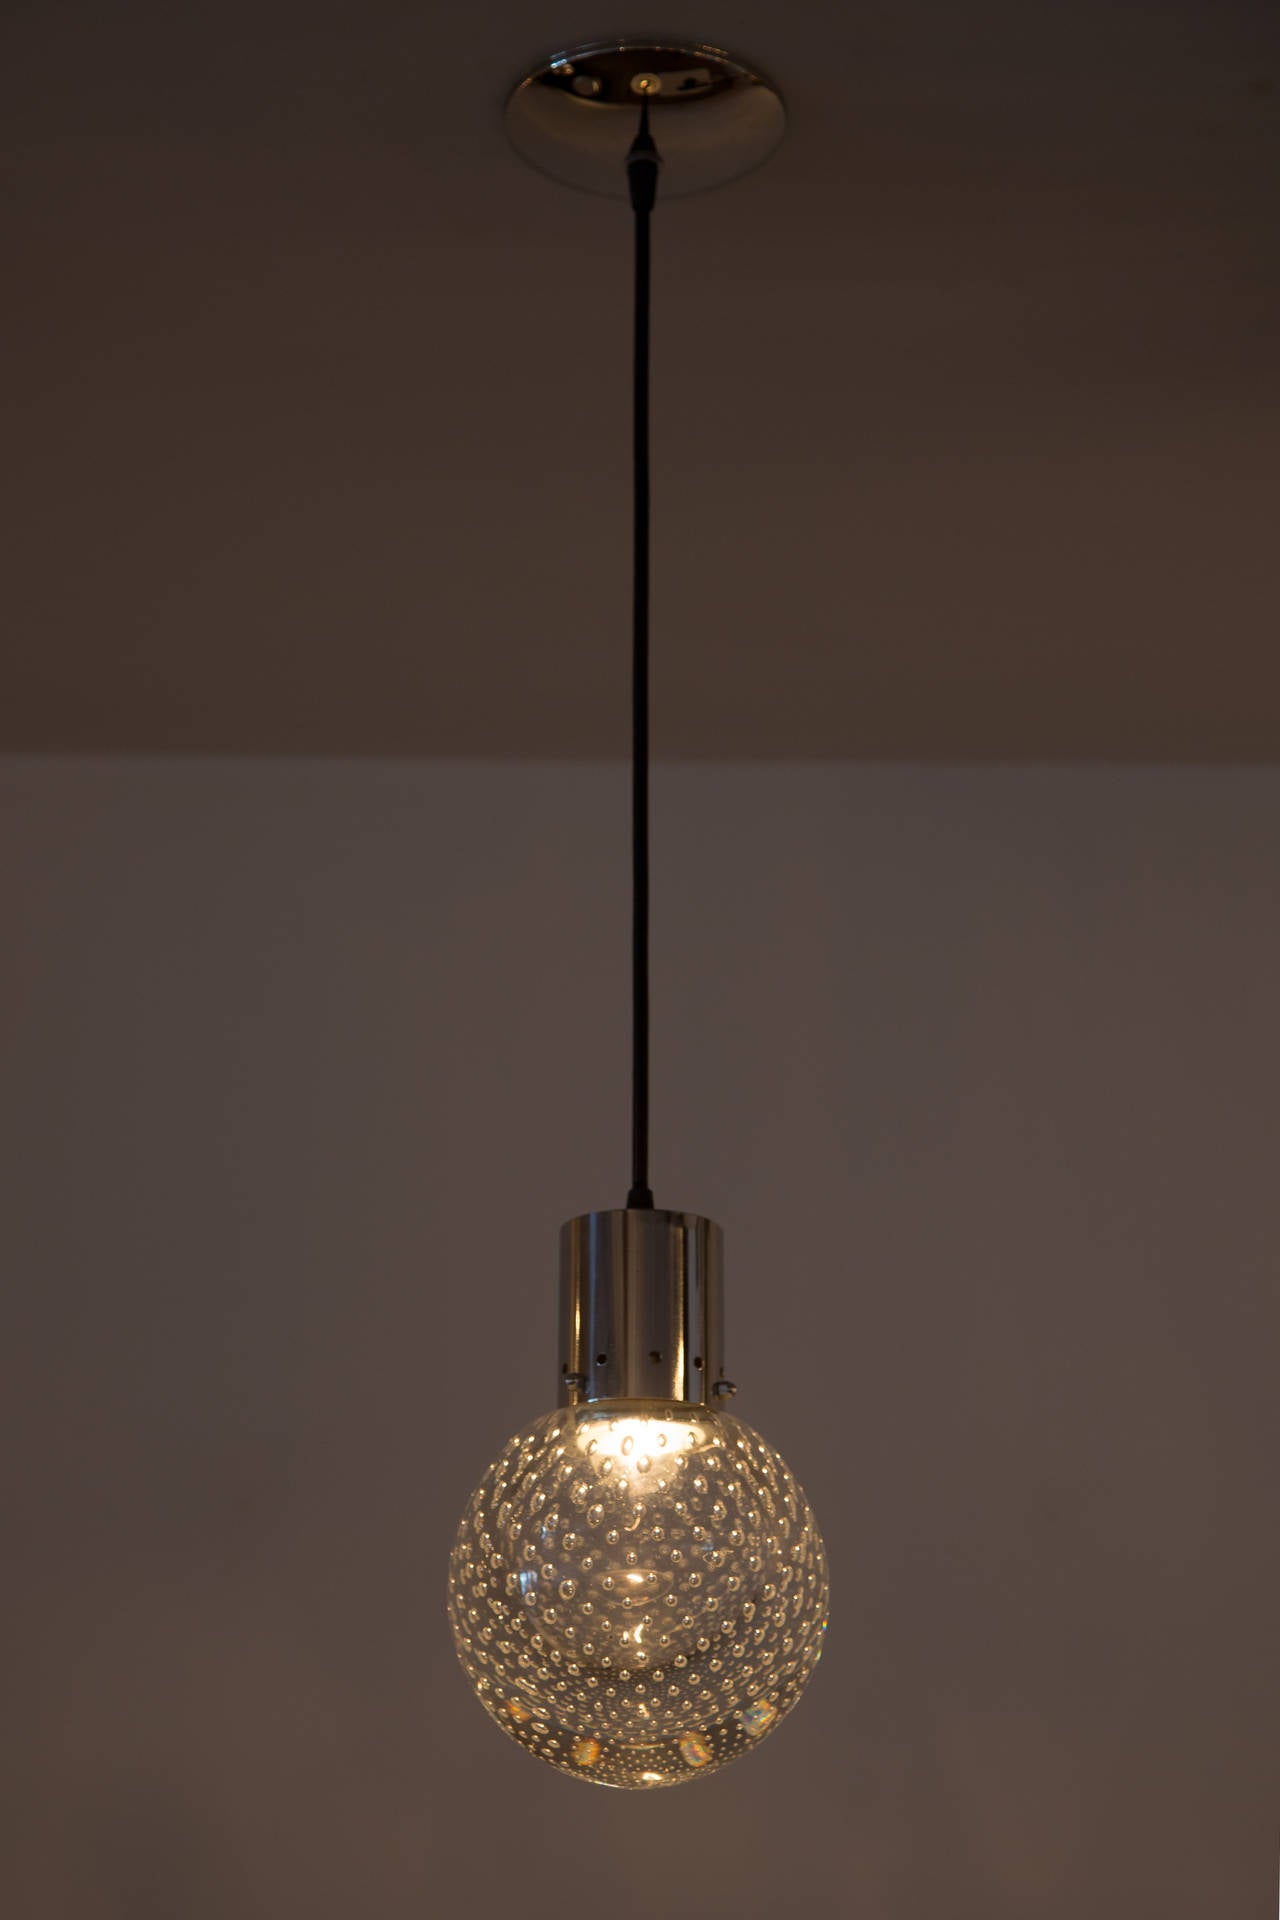 Controlled bubble glass ceiling lamp or pendant.
Chrome-plated brass canopy and casing.